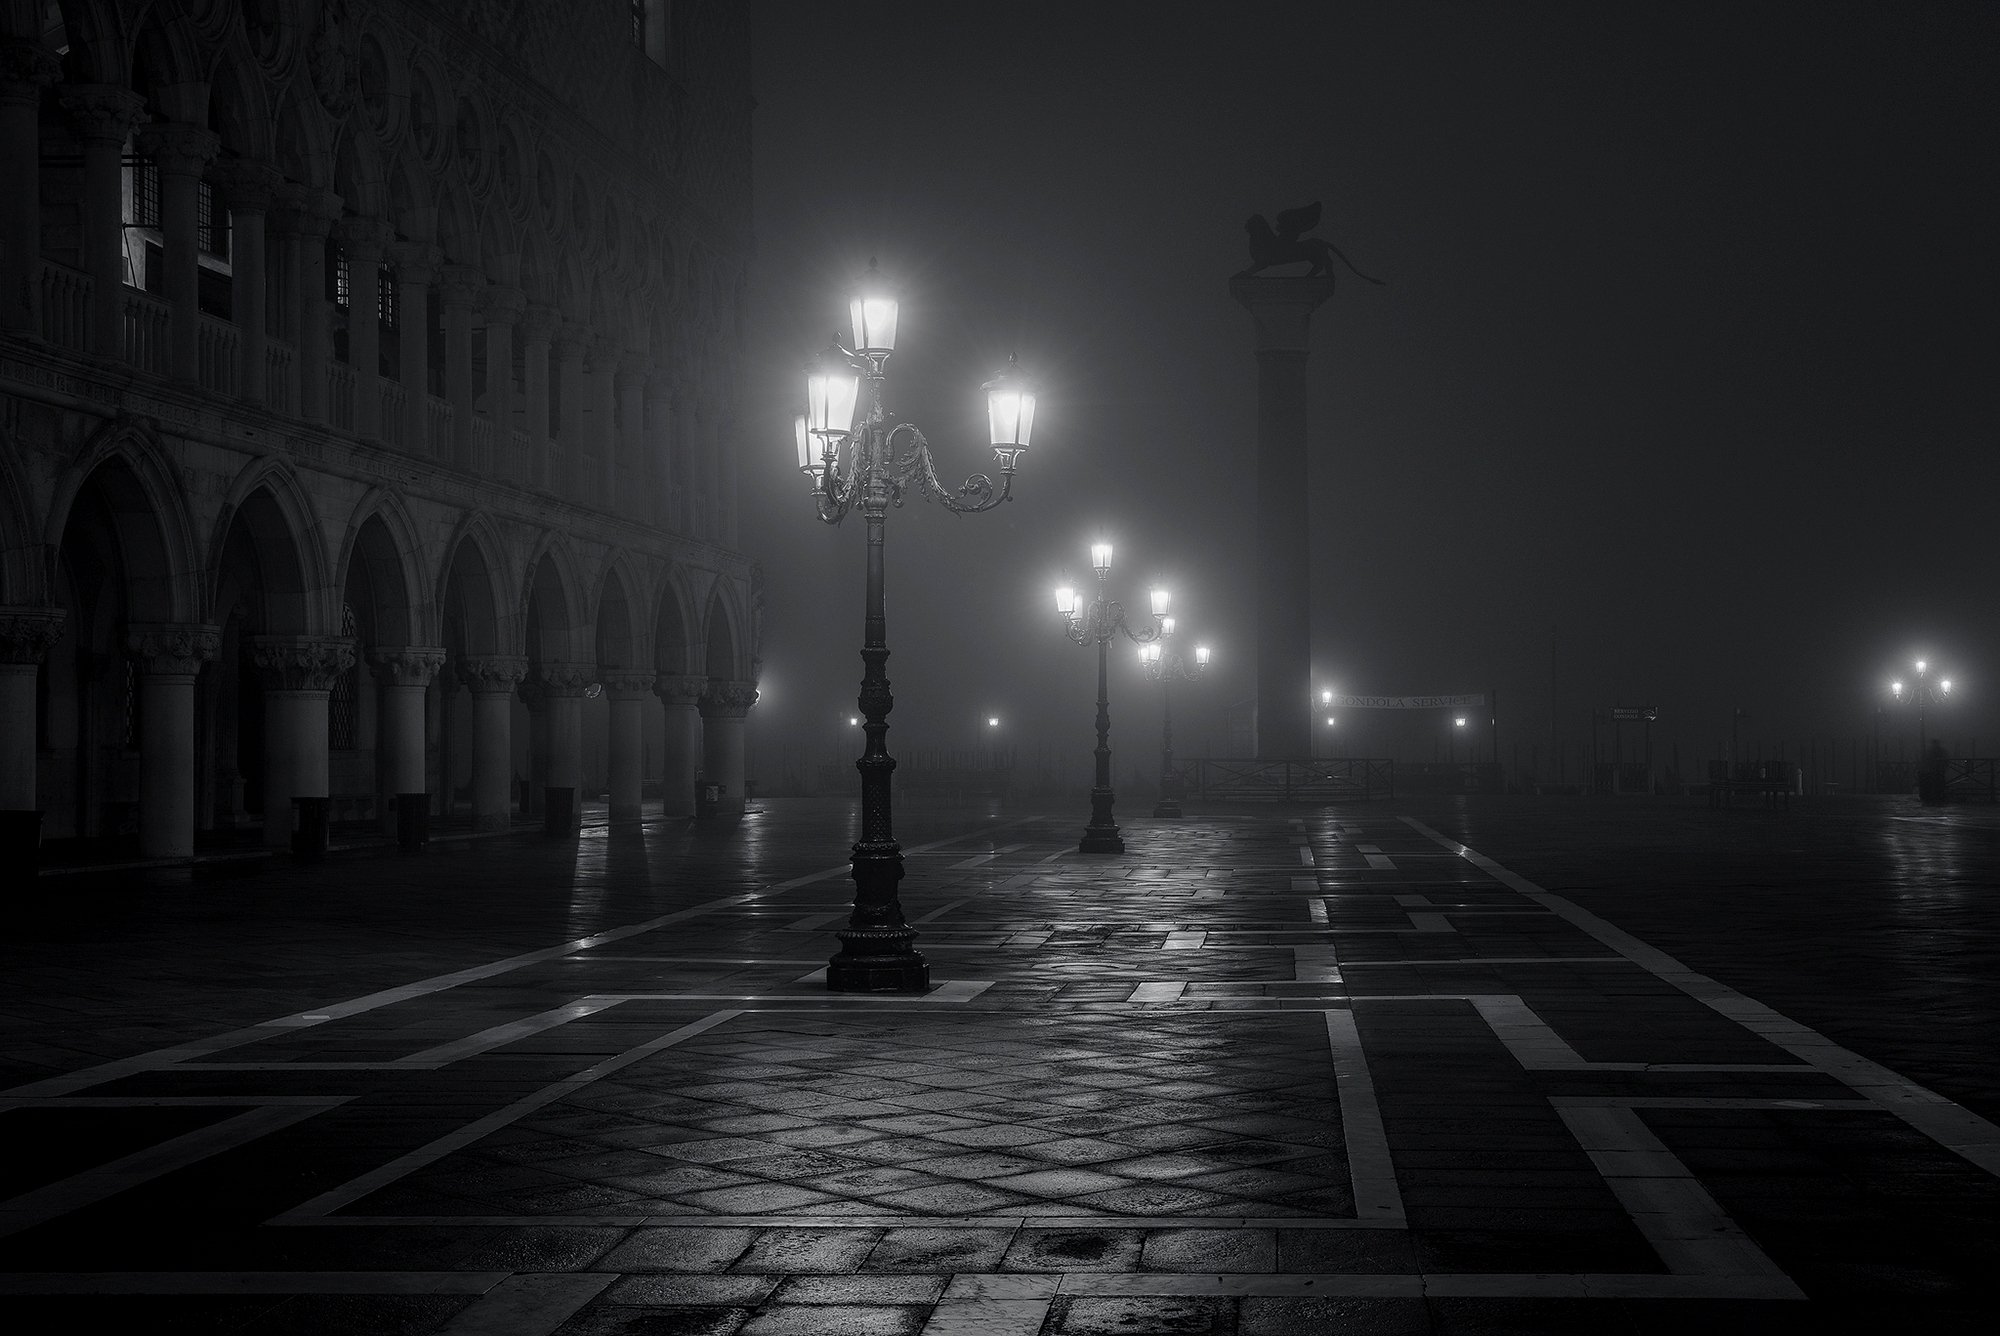 Marco City Night Fog Lights Black And White Mood Wallpaper Background